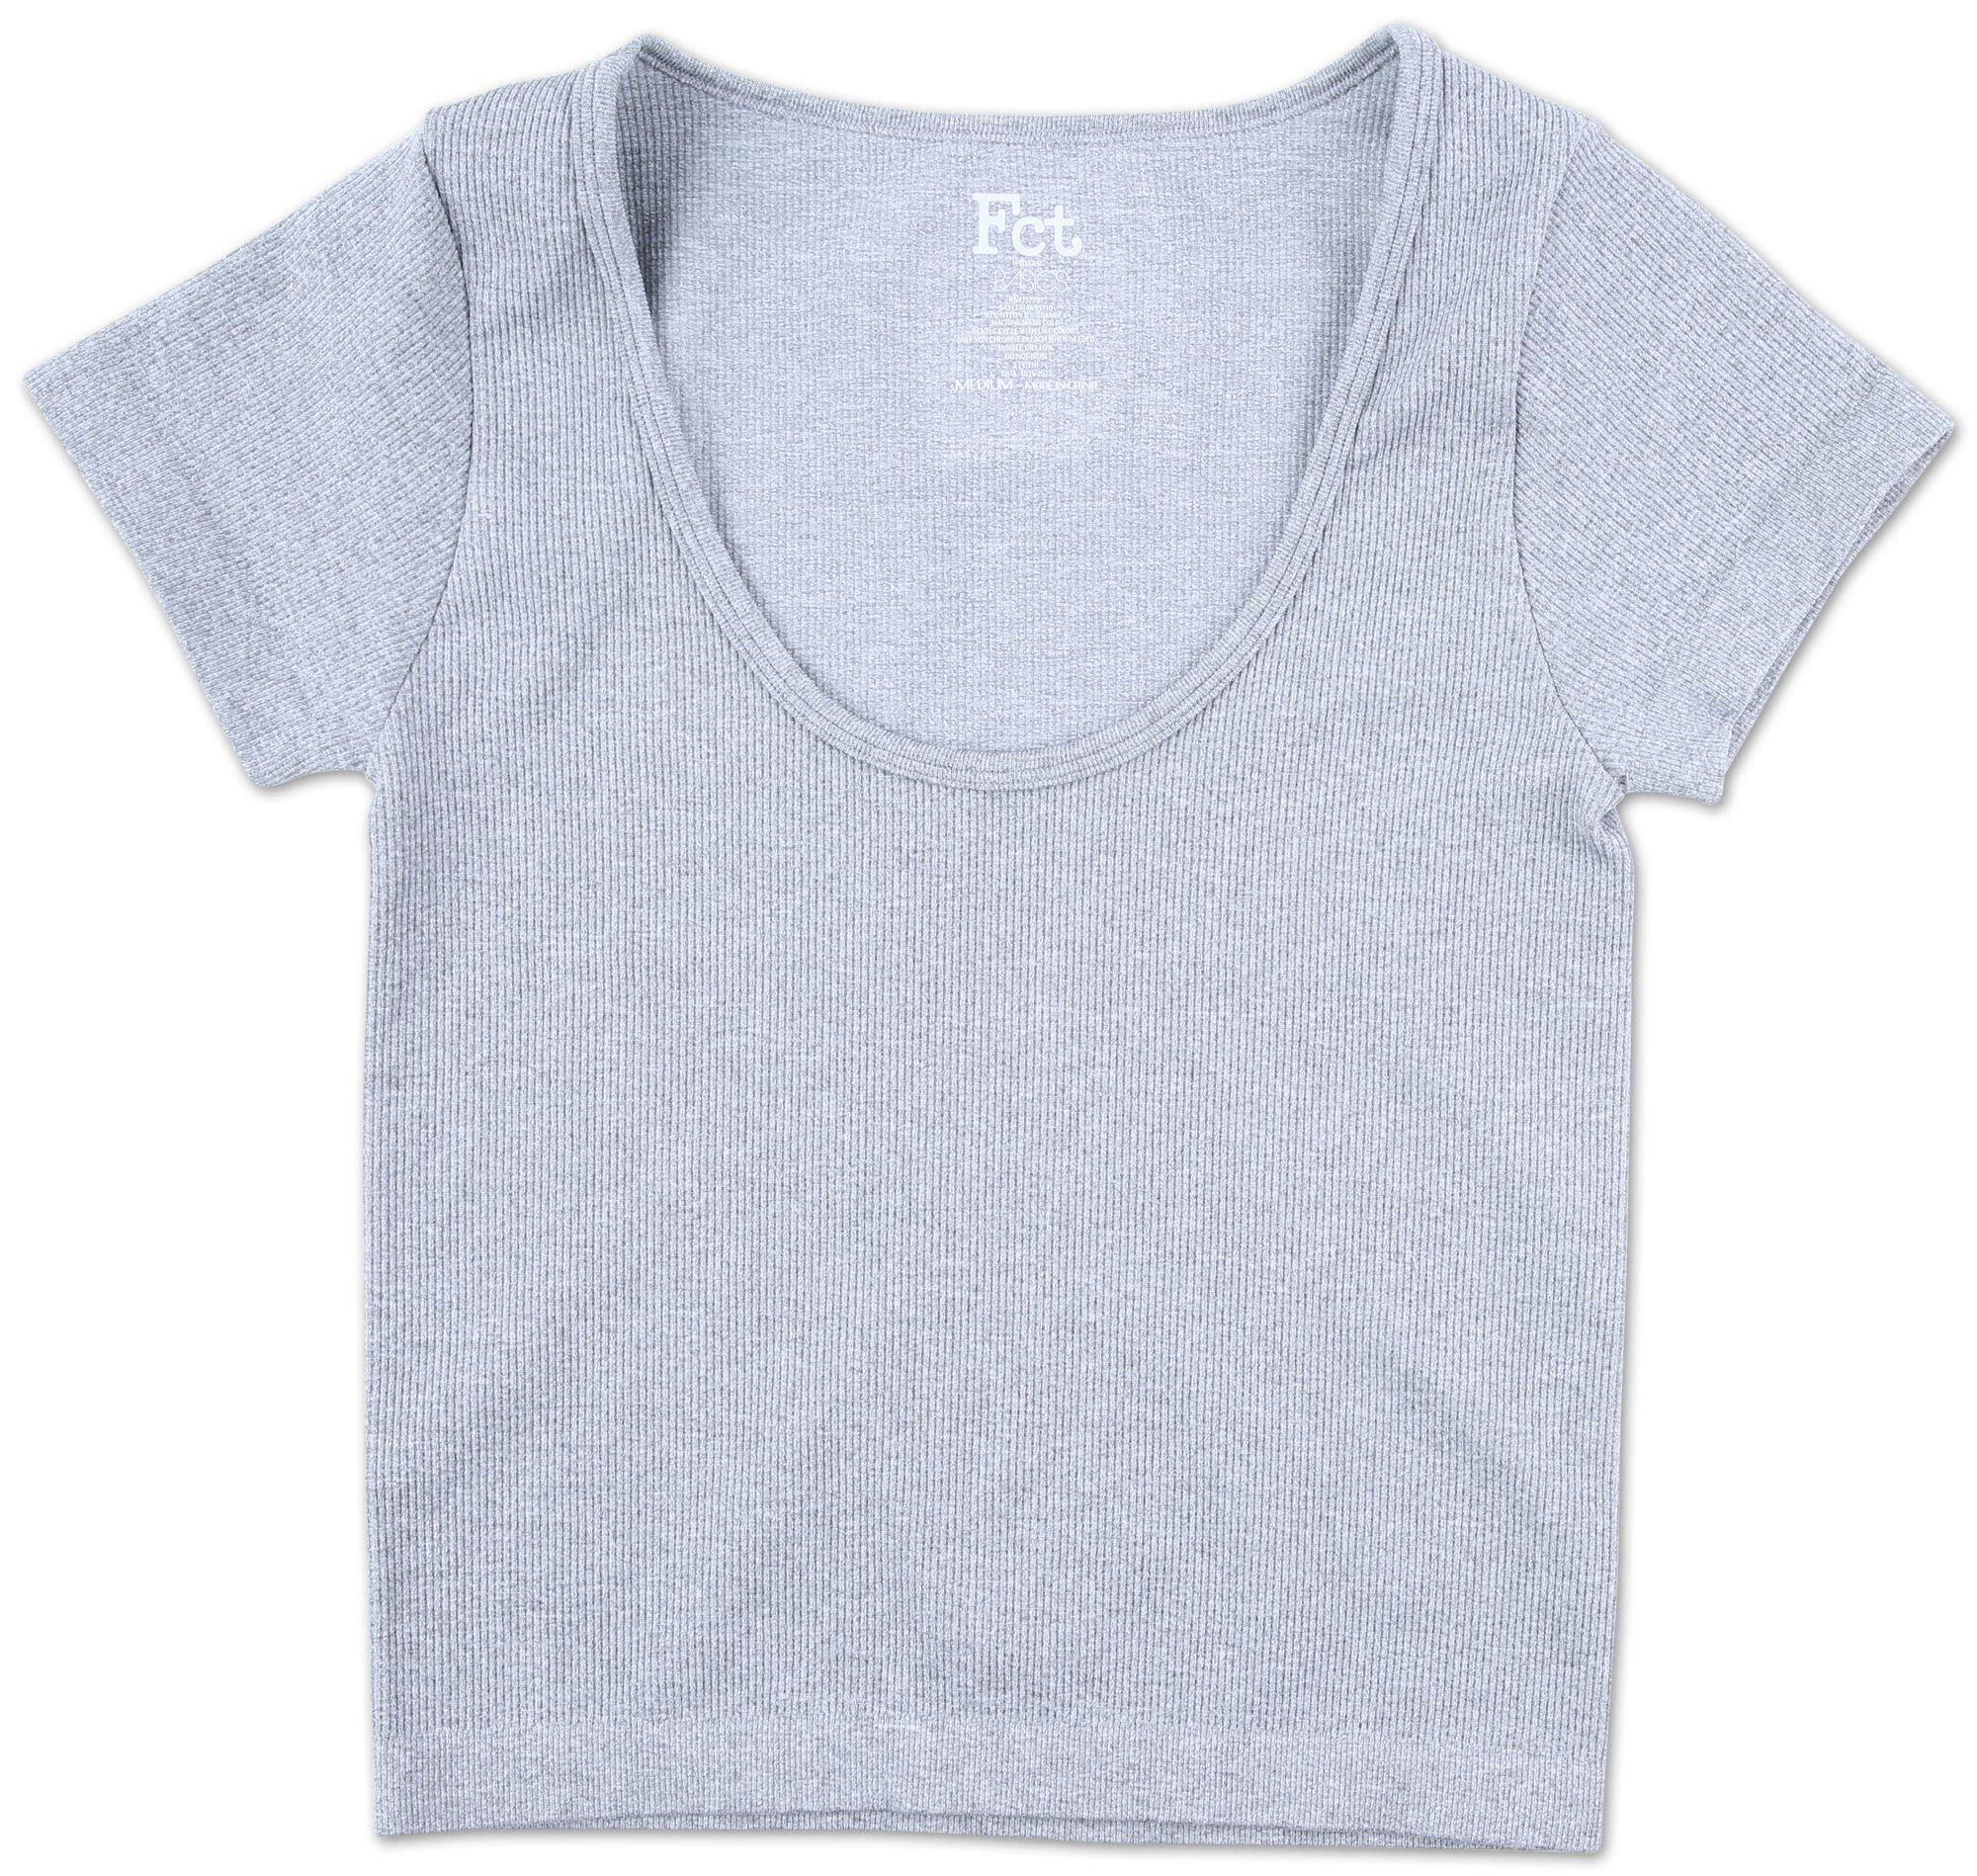 Juniors Solid Ribbed Top